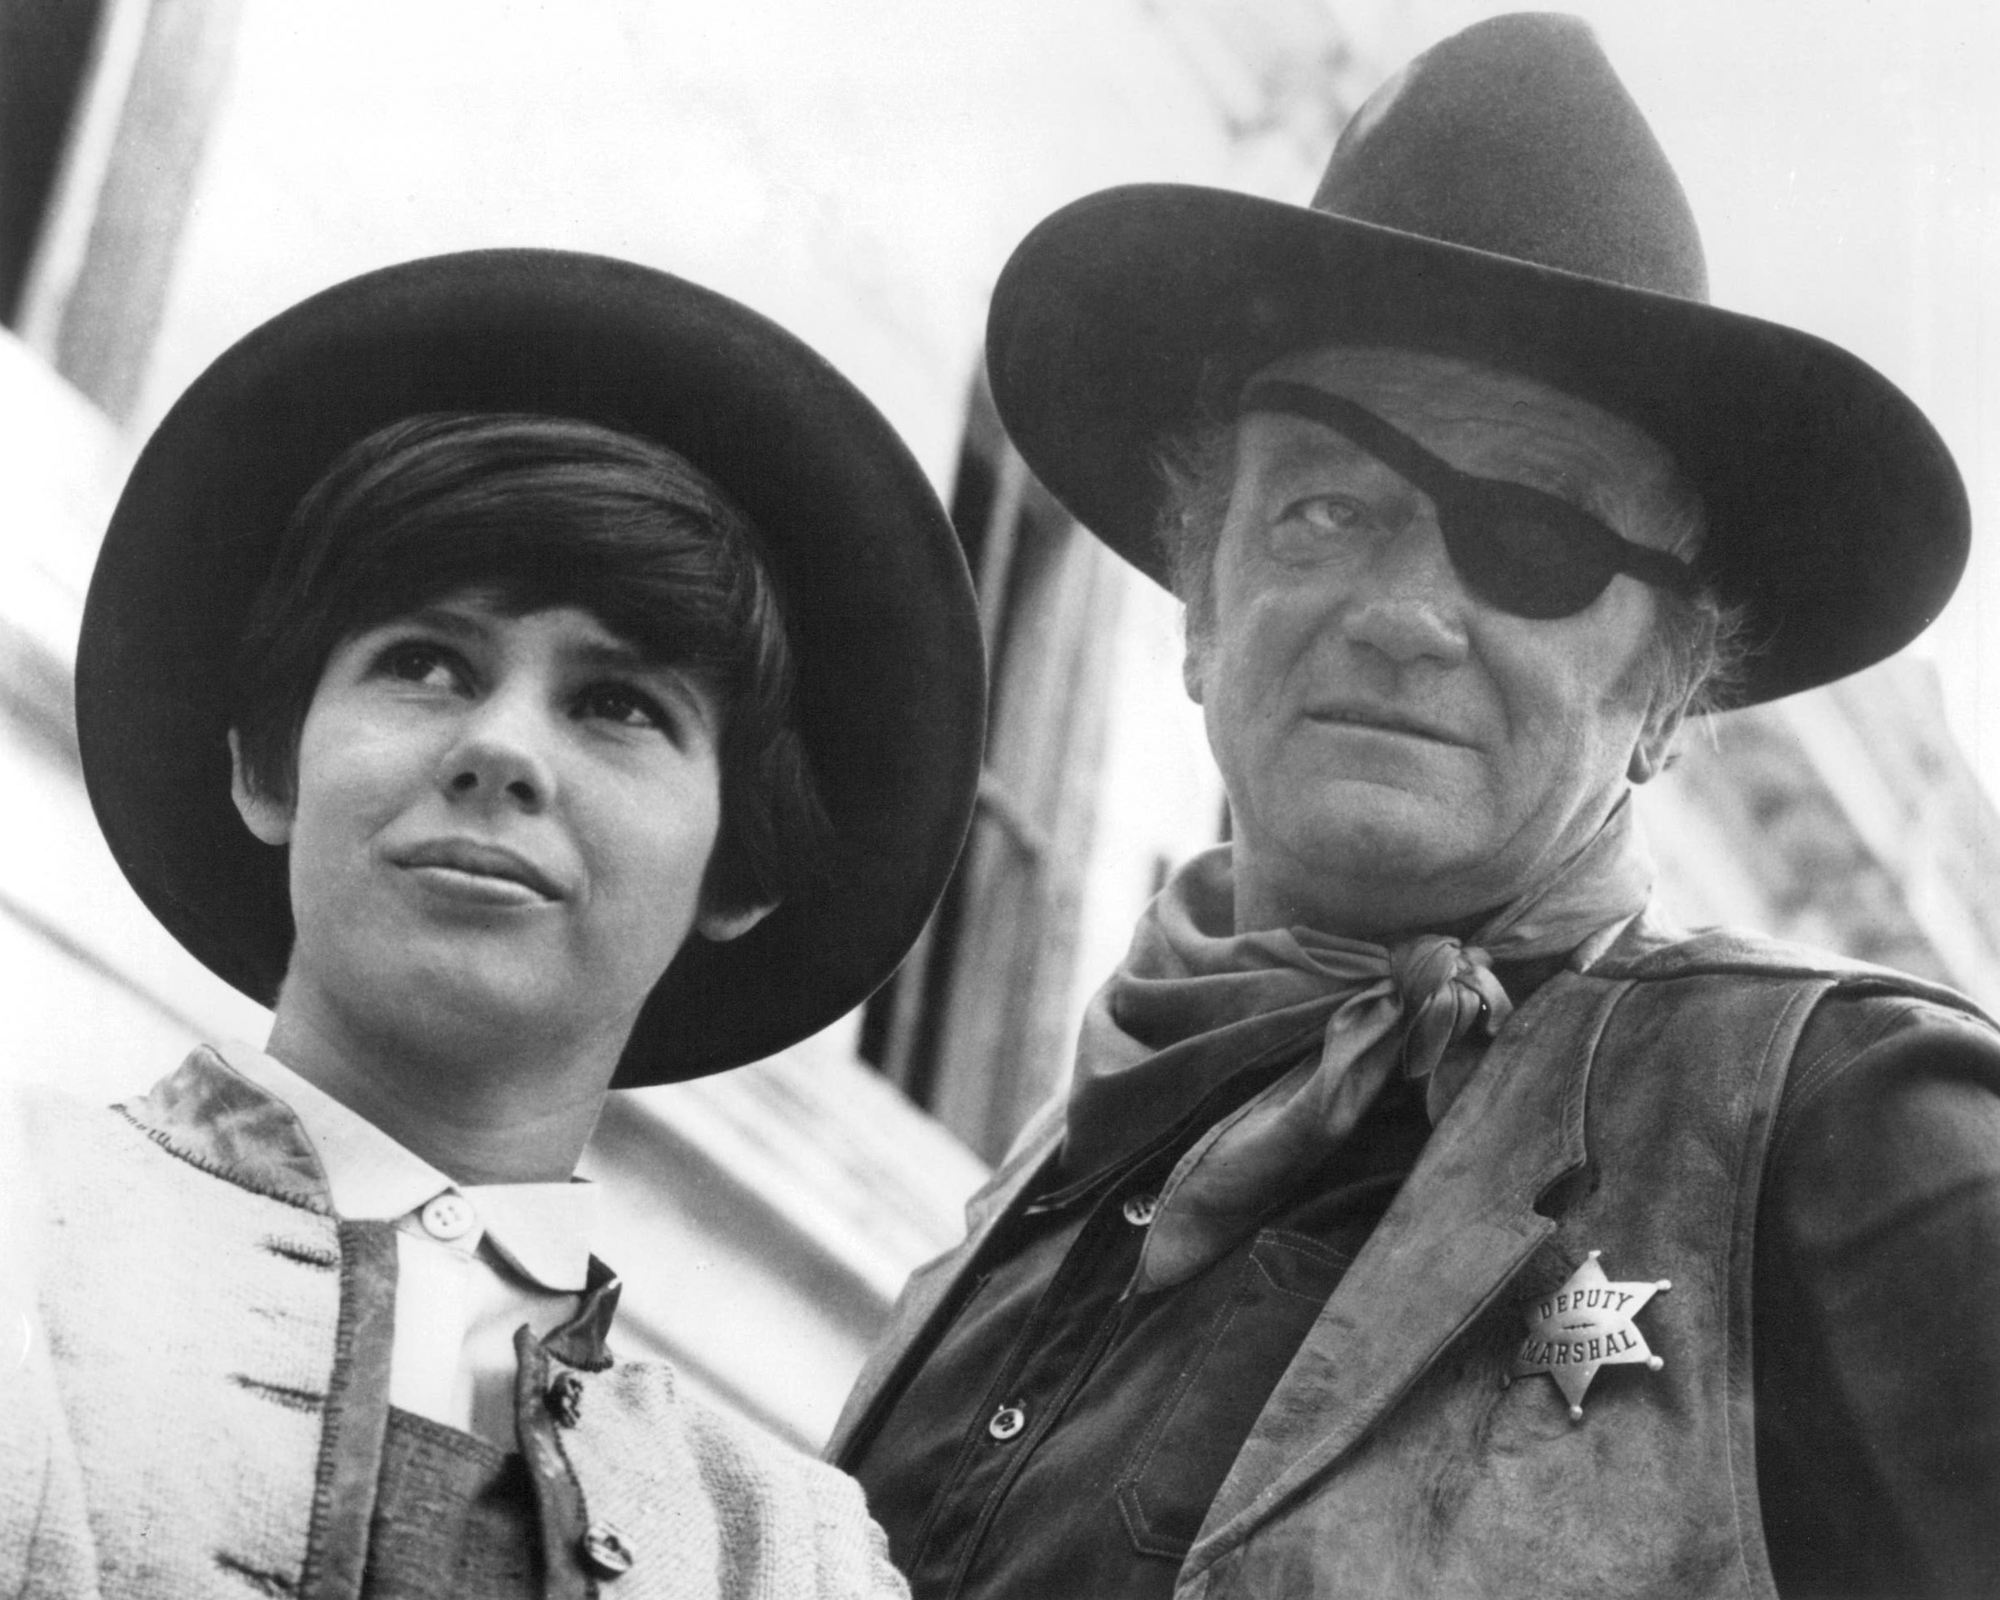 'True Grit' Kim Darby as Mattie Ross and Oscar-winner John Wayne as Rooster Cogburn wearing cowboy hats and Western clothing in black-and-white